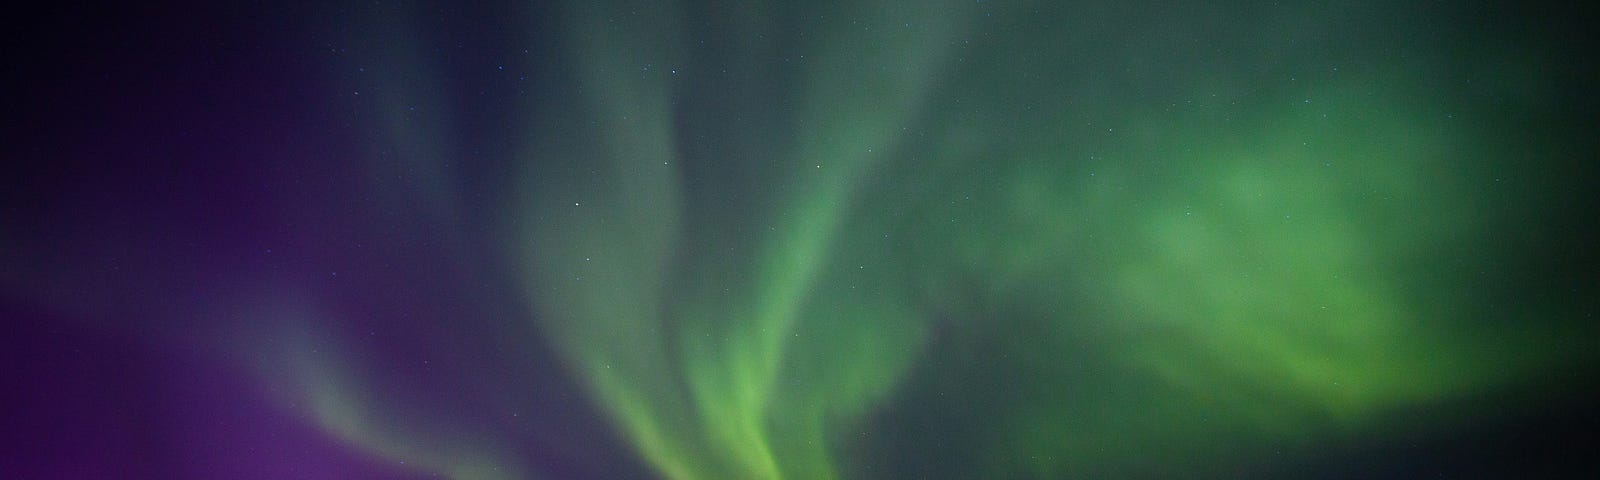 The Northern Lights in hues or green, yellow, and purple light the sky.